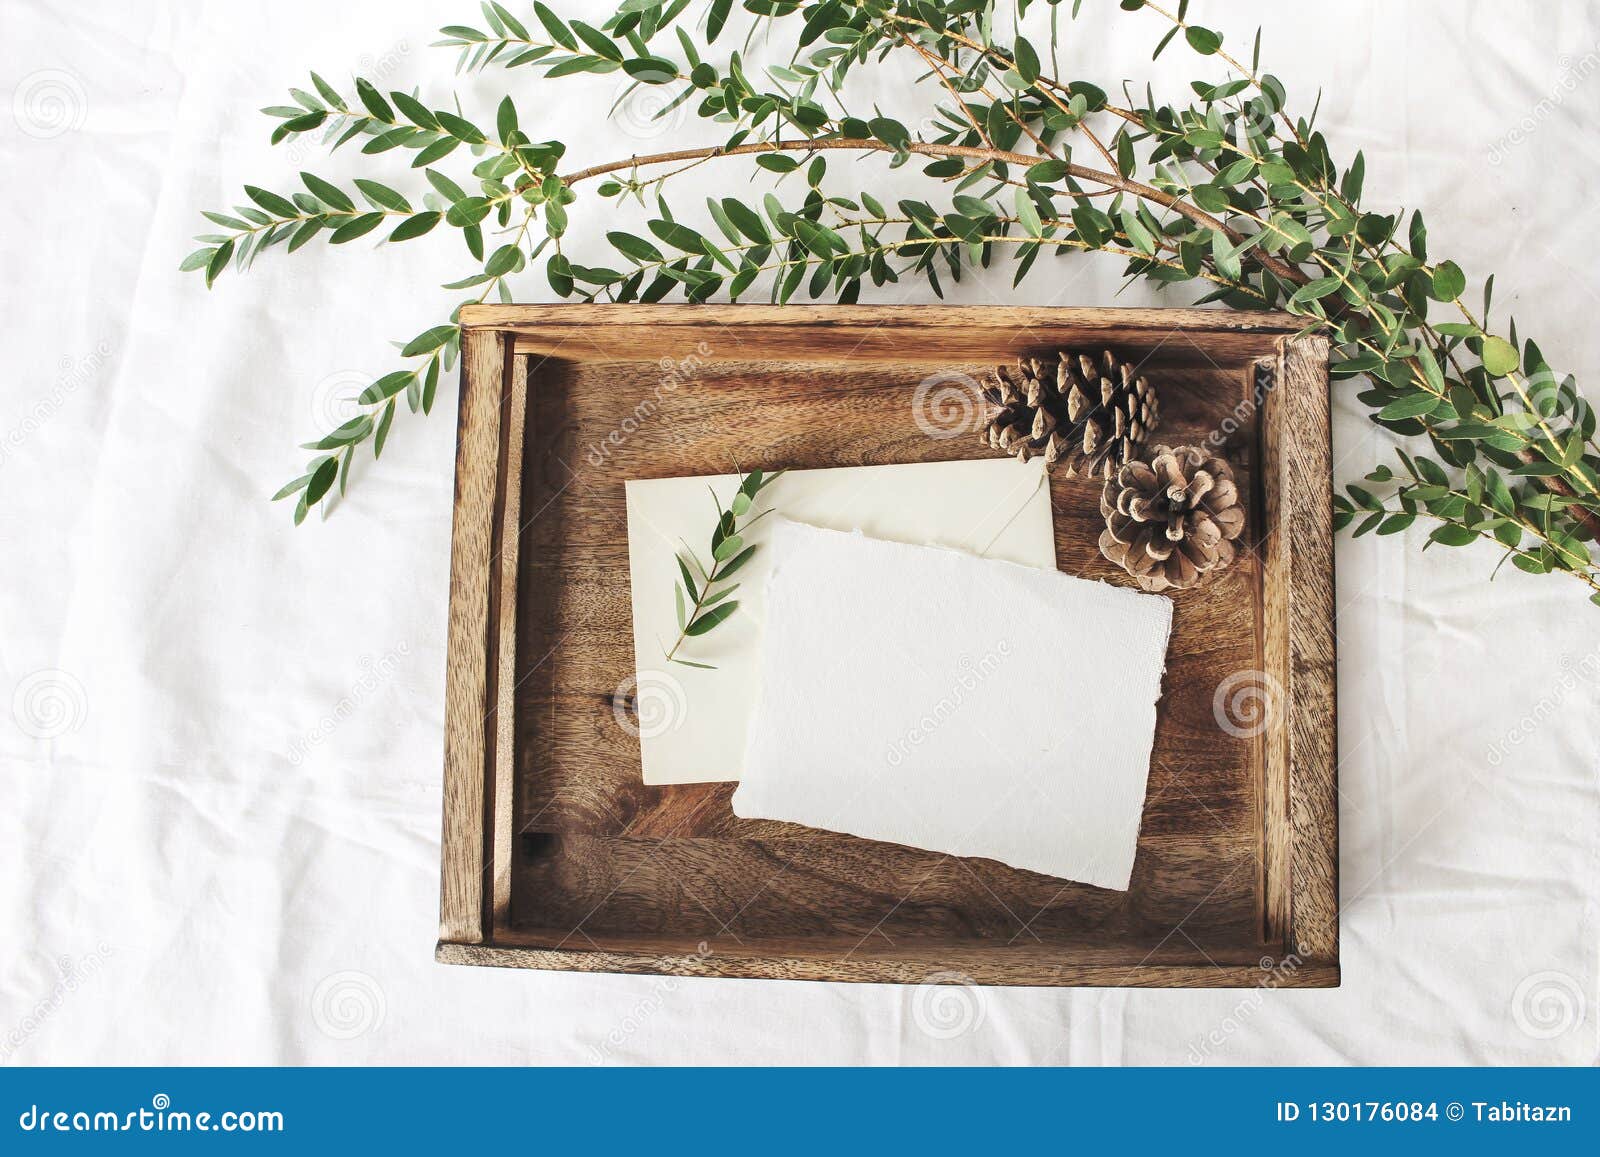 christmas or winter wedding mock-up scene. blank cotton paper greeting cards, old wooden tray, pine cones and green